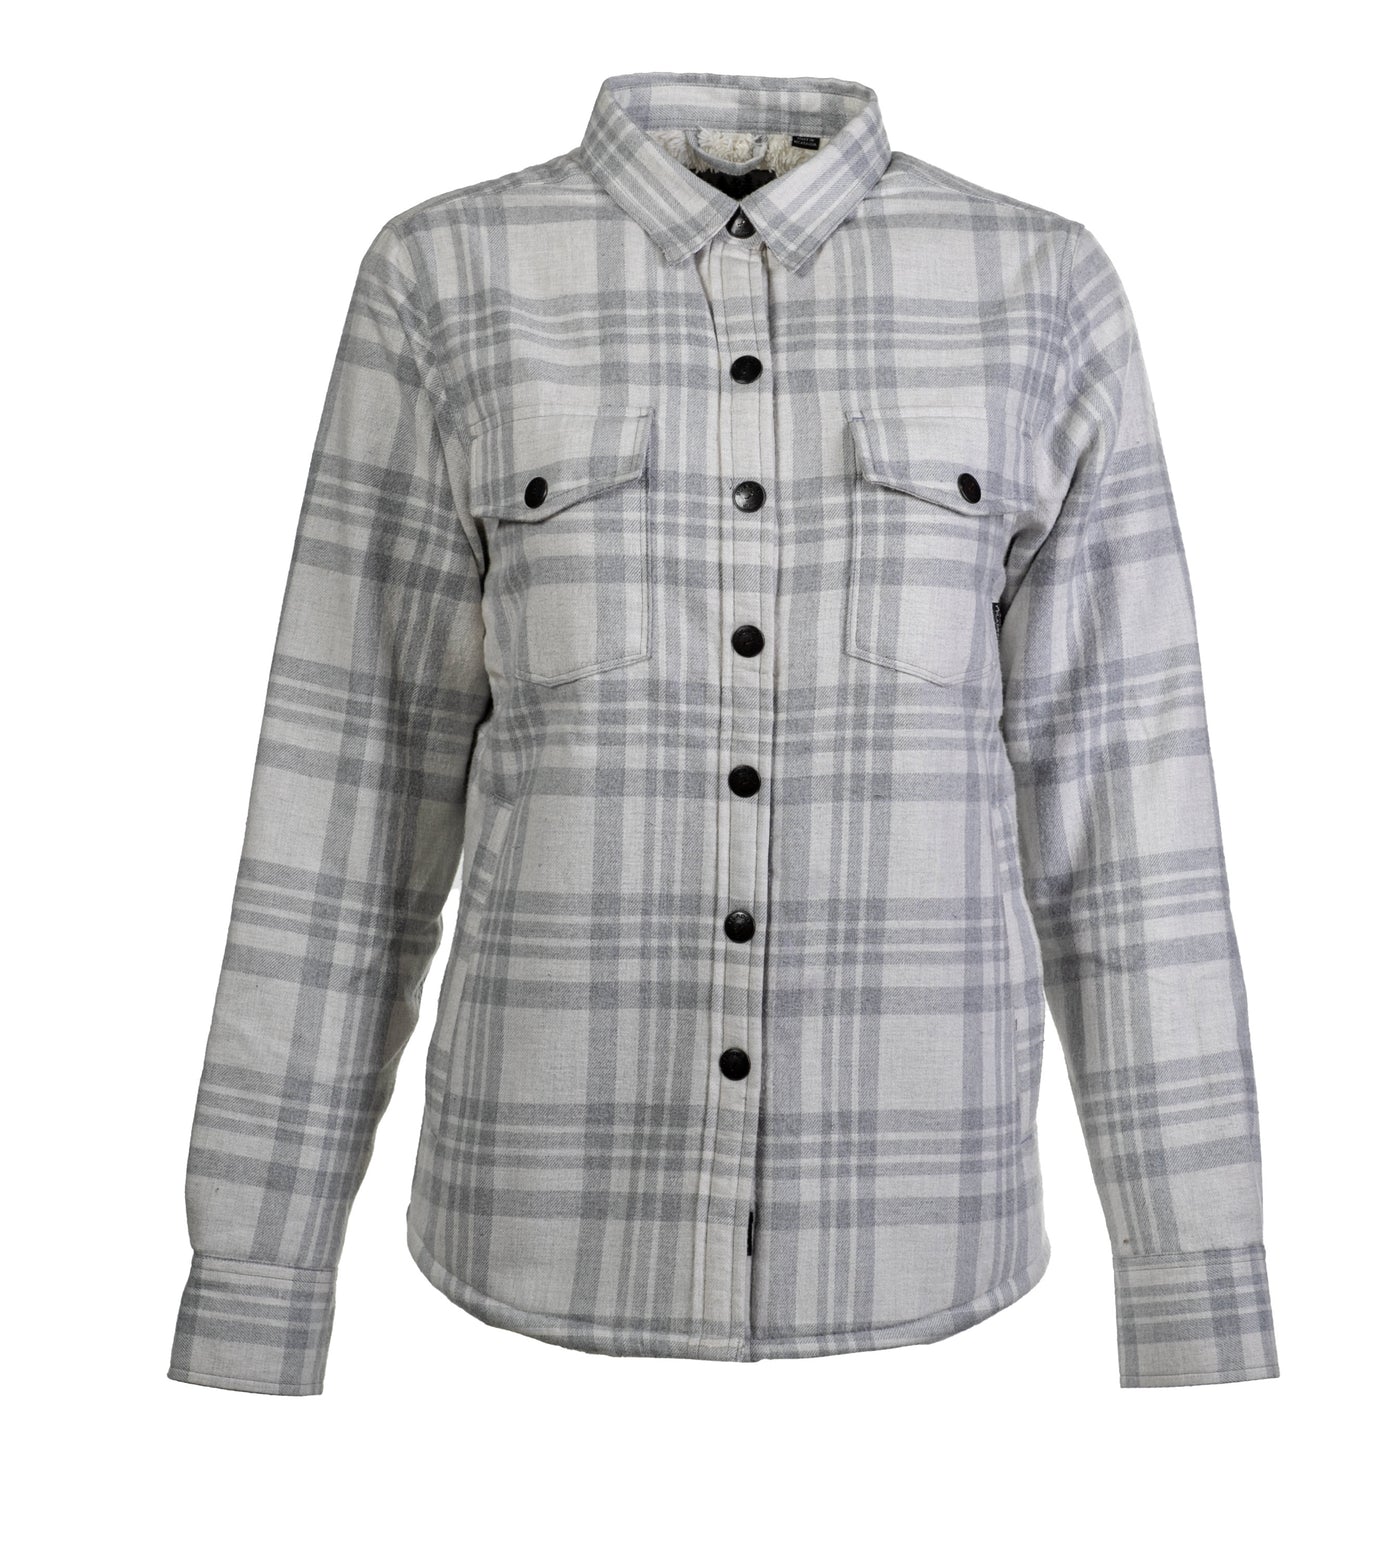 Women's Northwood Sherpa Insulated Flannel Jacket- Cloud Grey